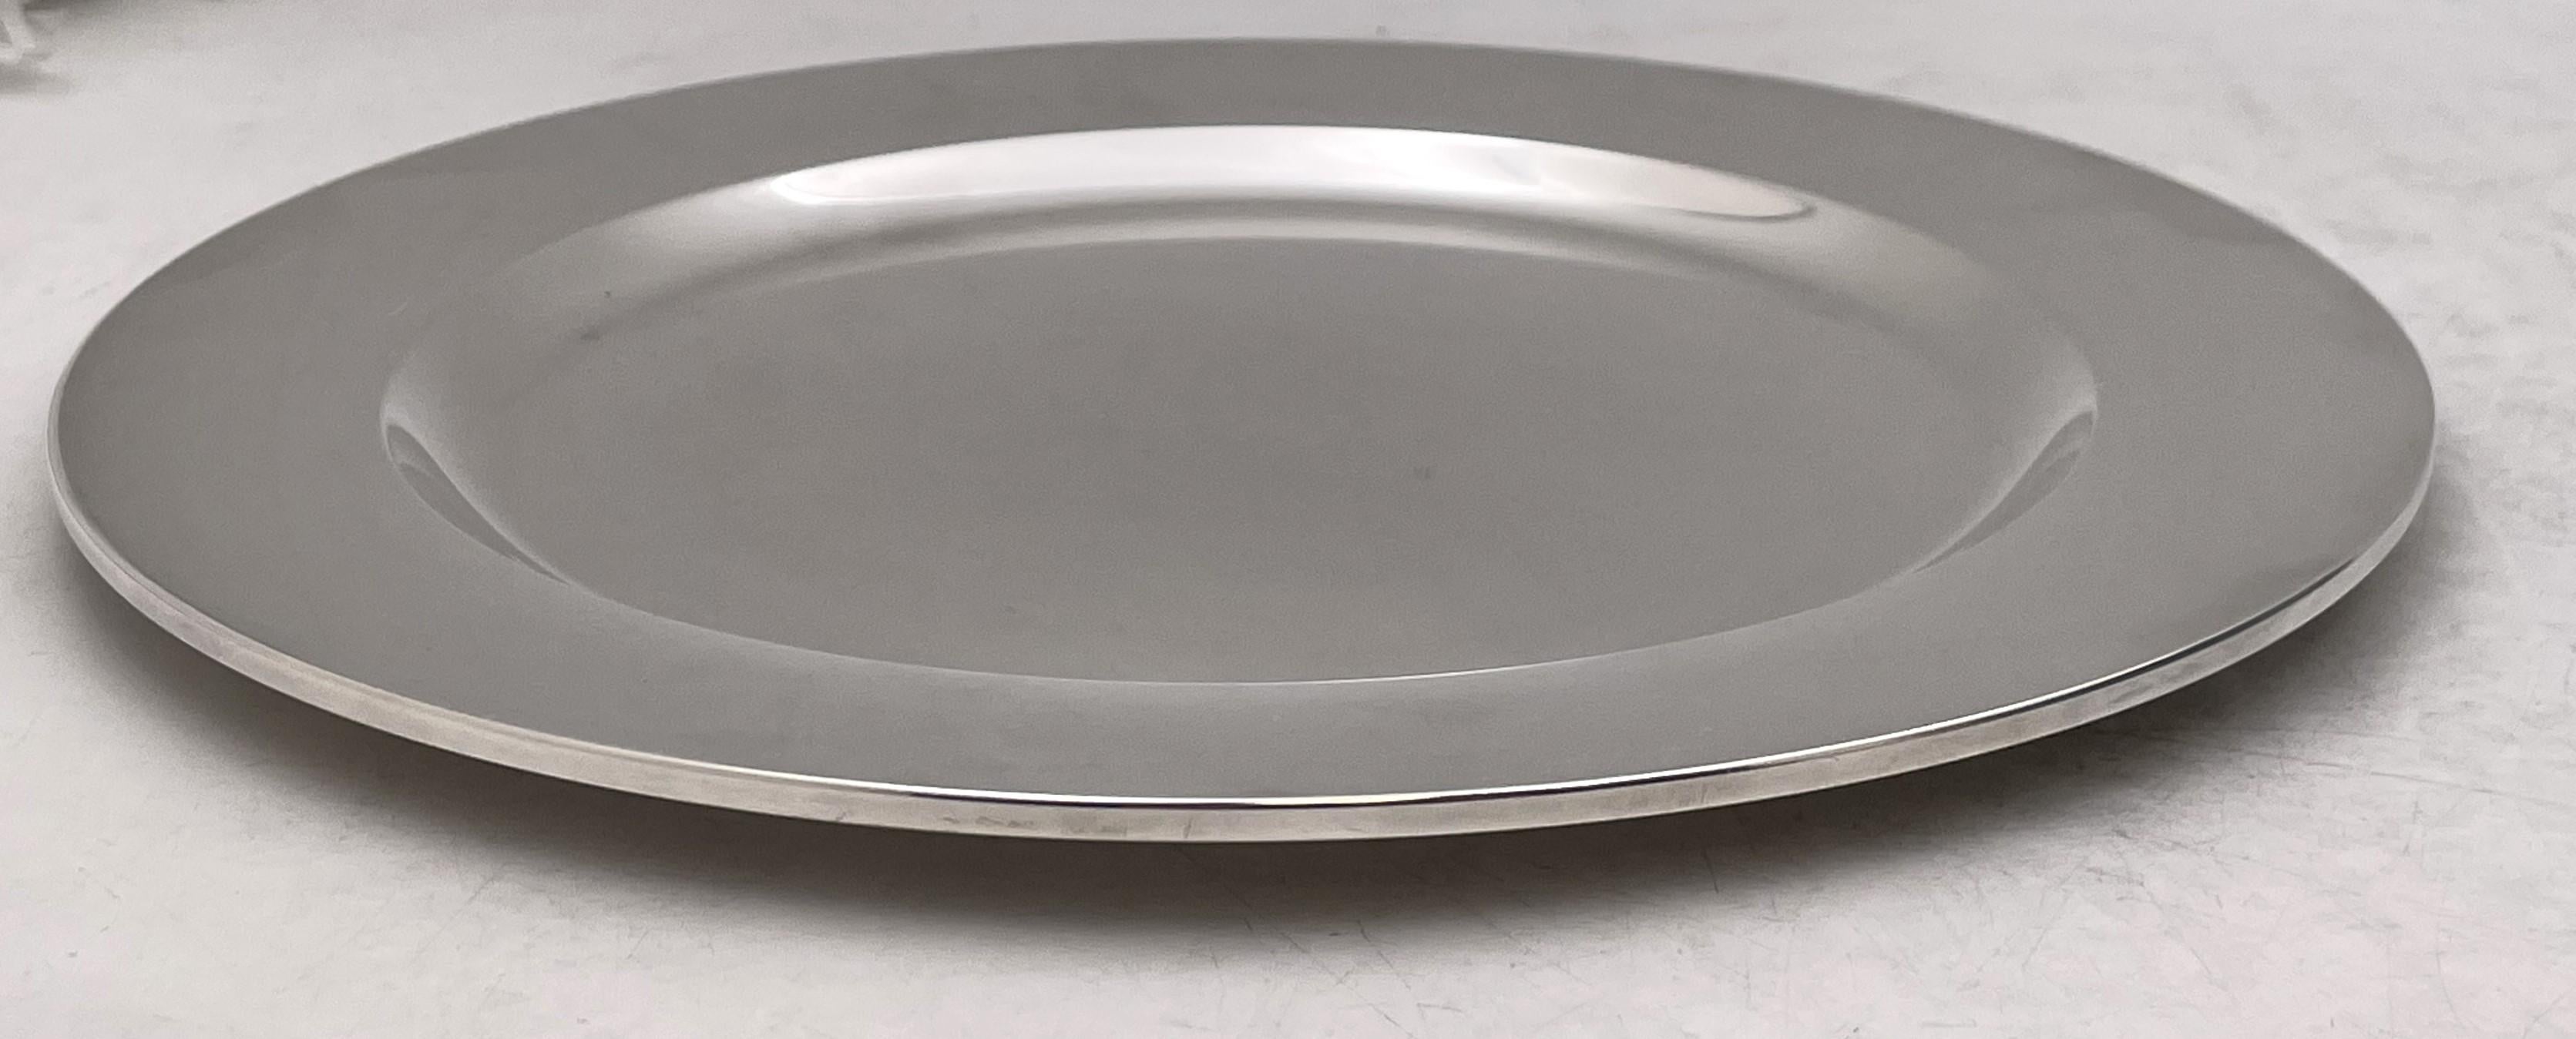 Danish Georg Jensen by Koppel Sterling Silver Plate/ Charger #1074 Mid-Century Modern For Sale